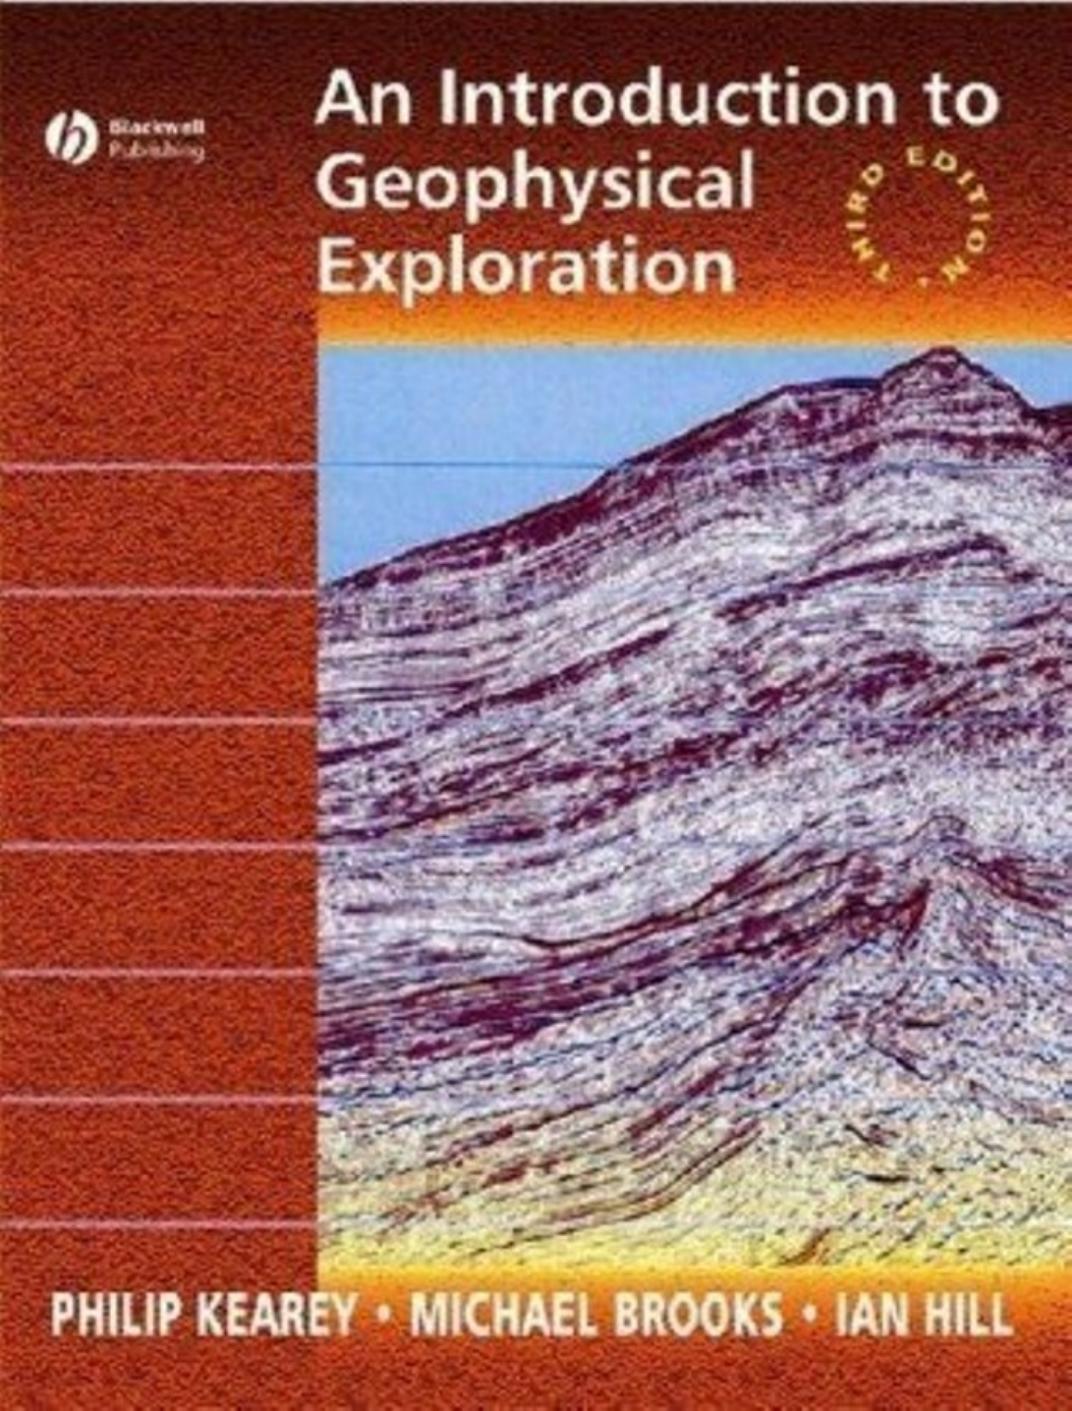 An Introduction to Geophysical Exploration, 3e